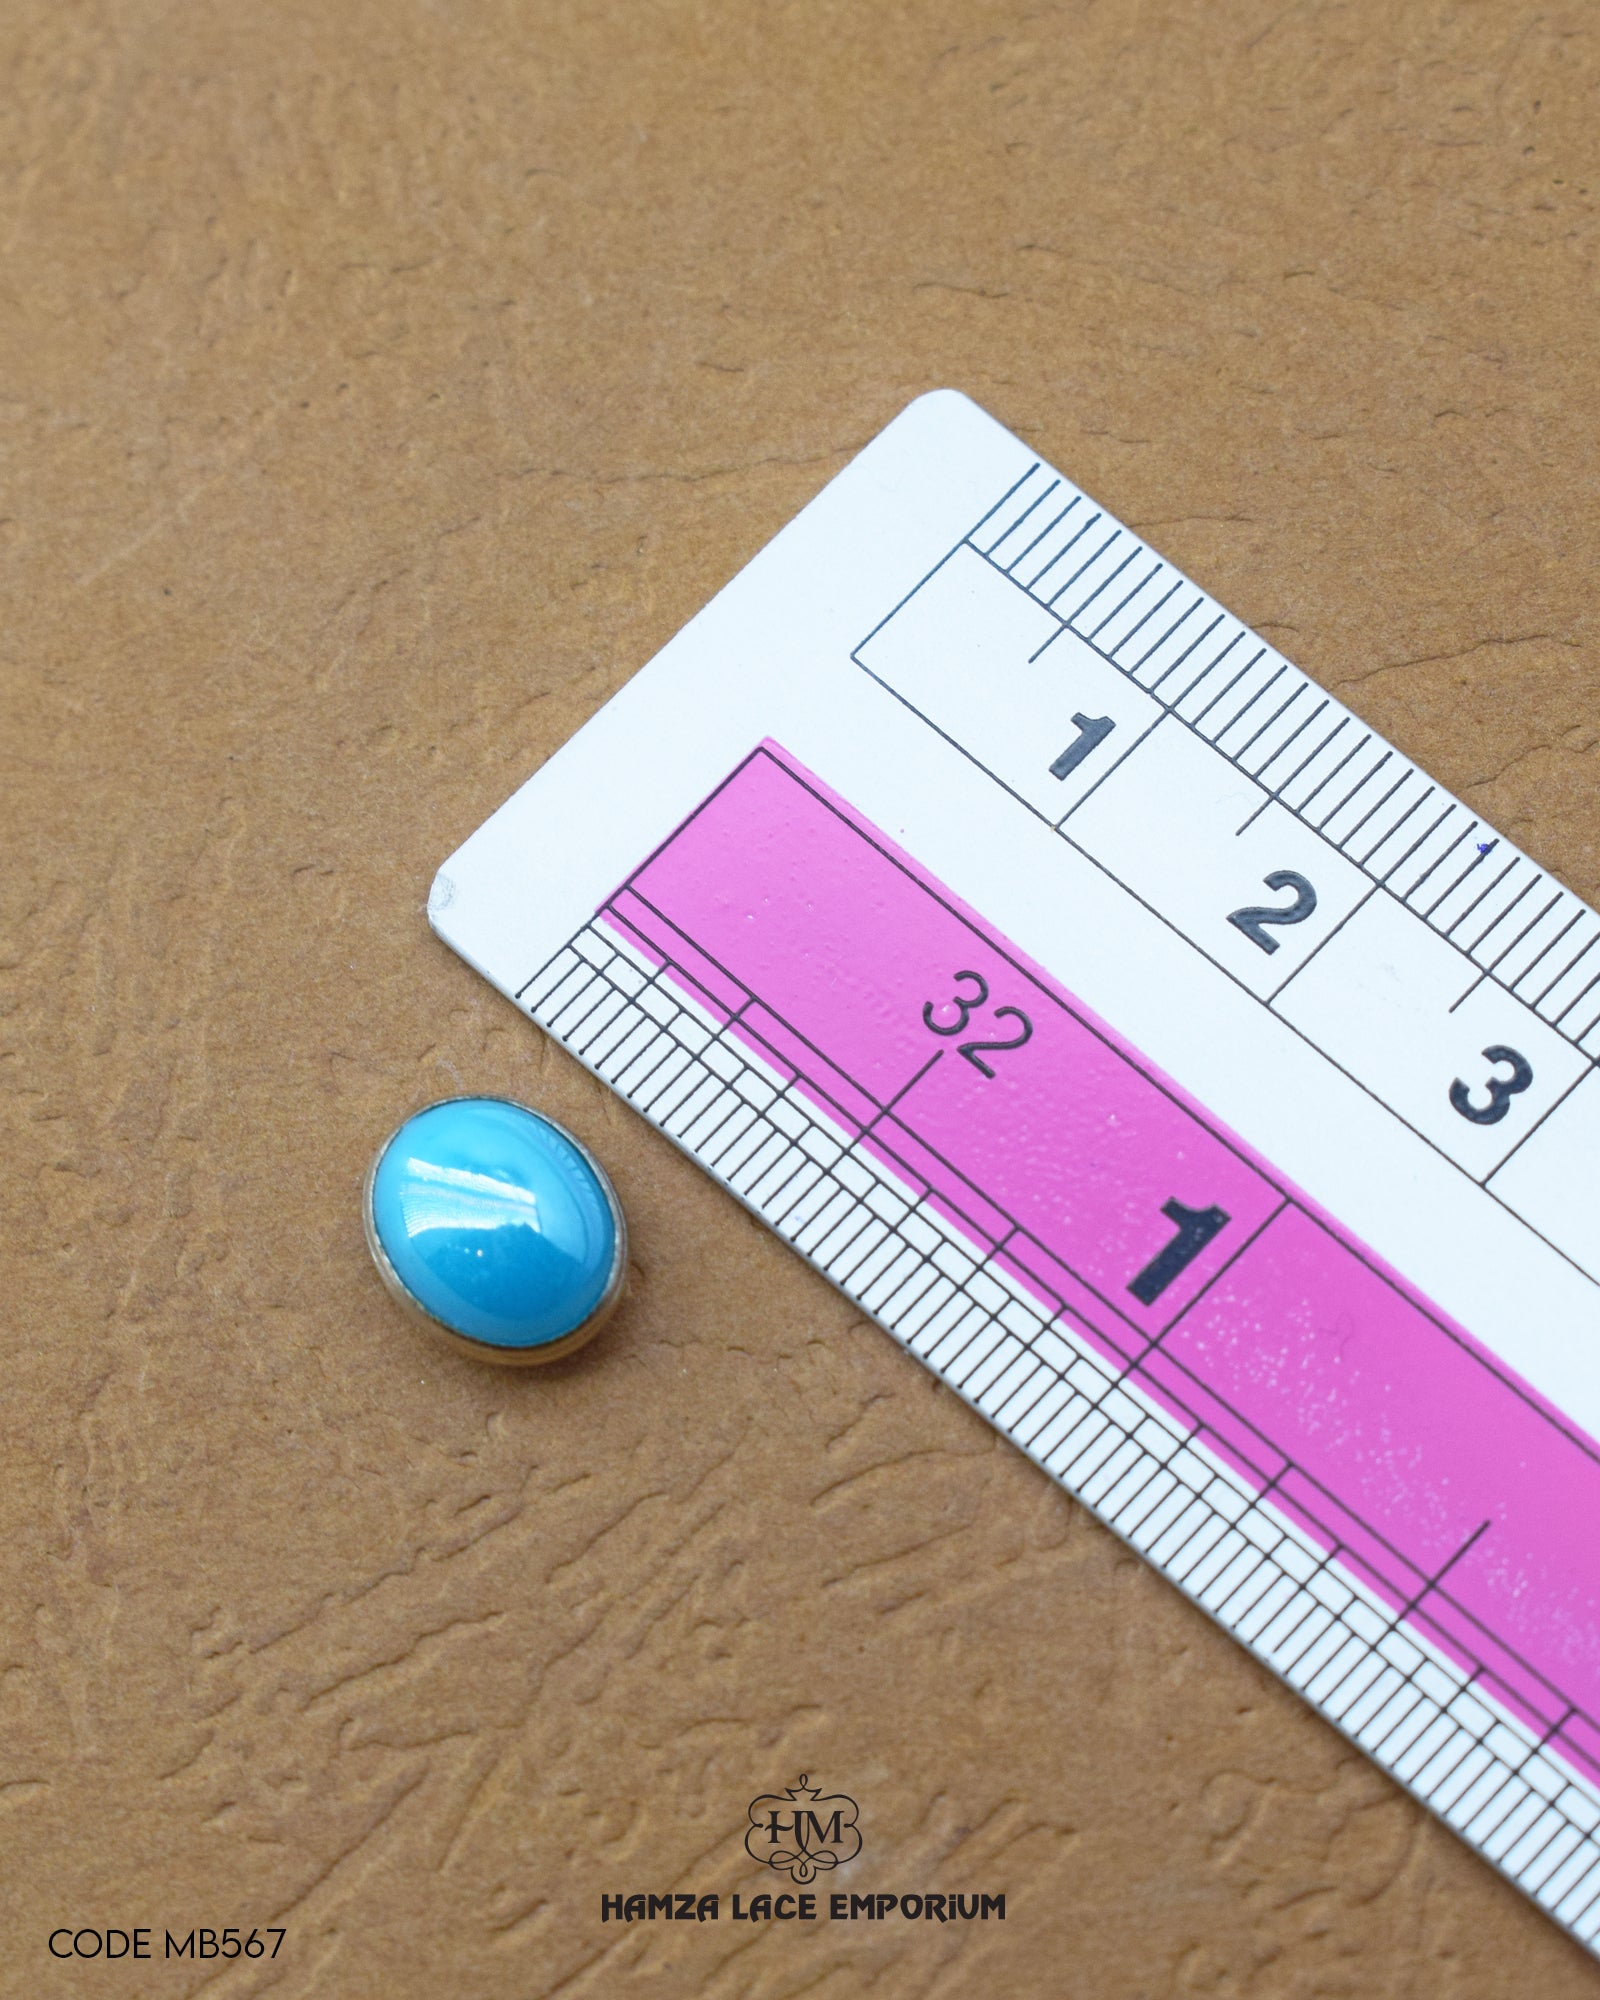 Size of the 'Metal Button MB567' is given with the help of a ruler